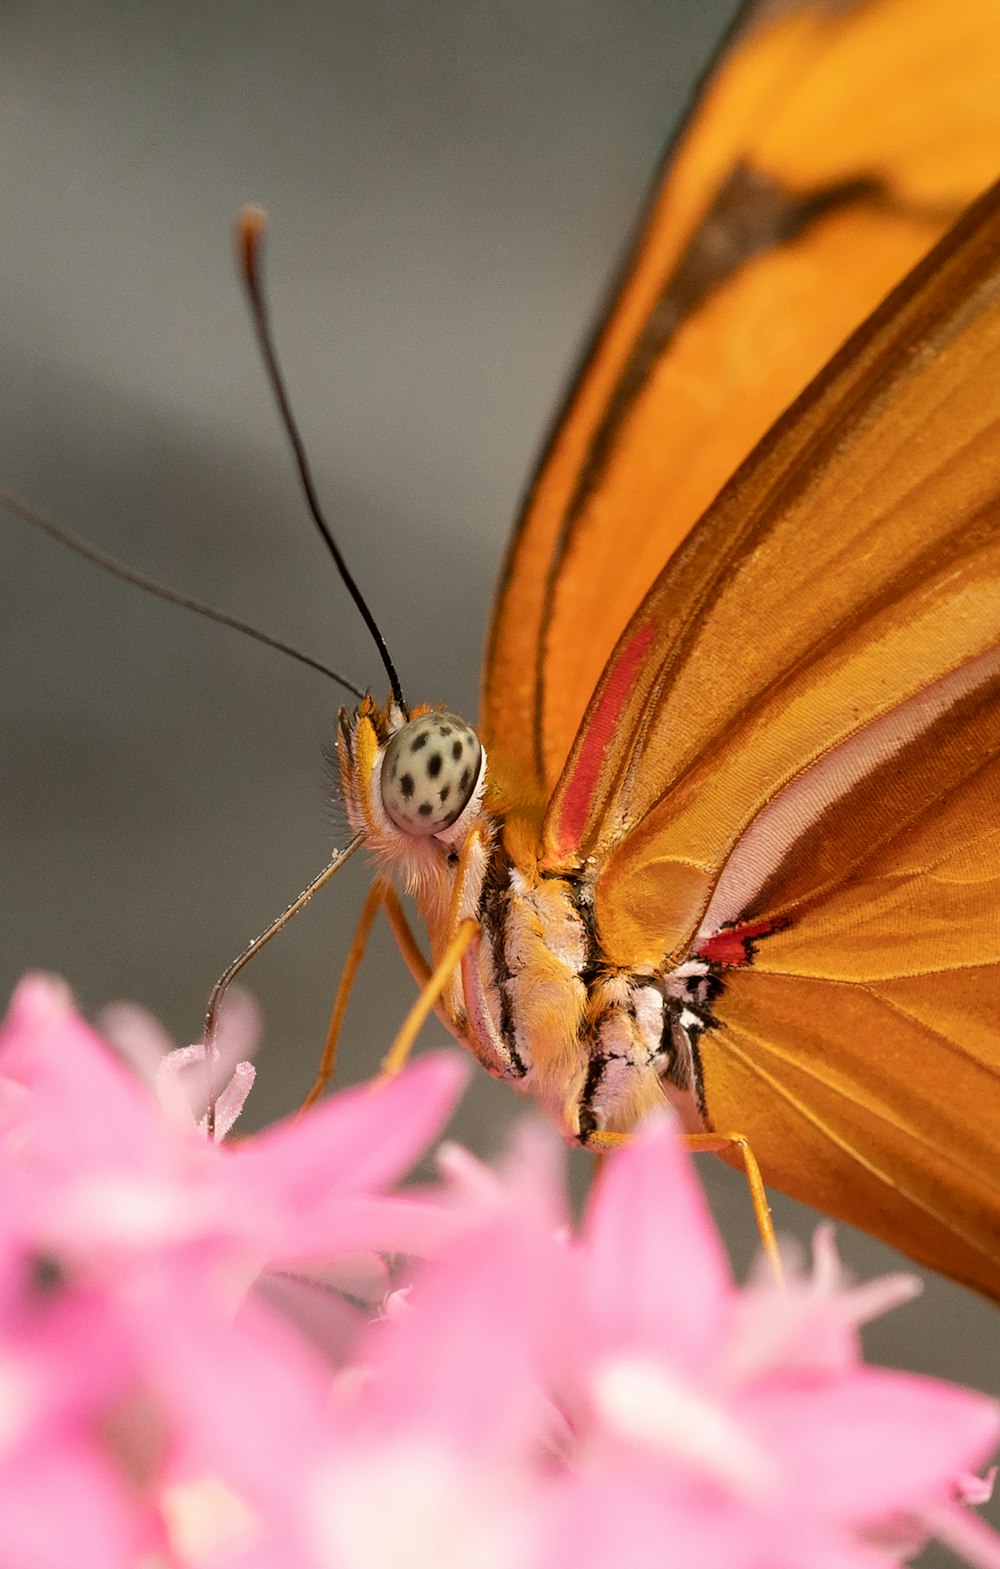 brown butterfly perched on pink flower in close up photography during daytime